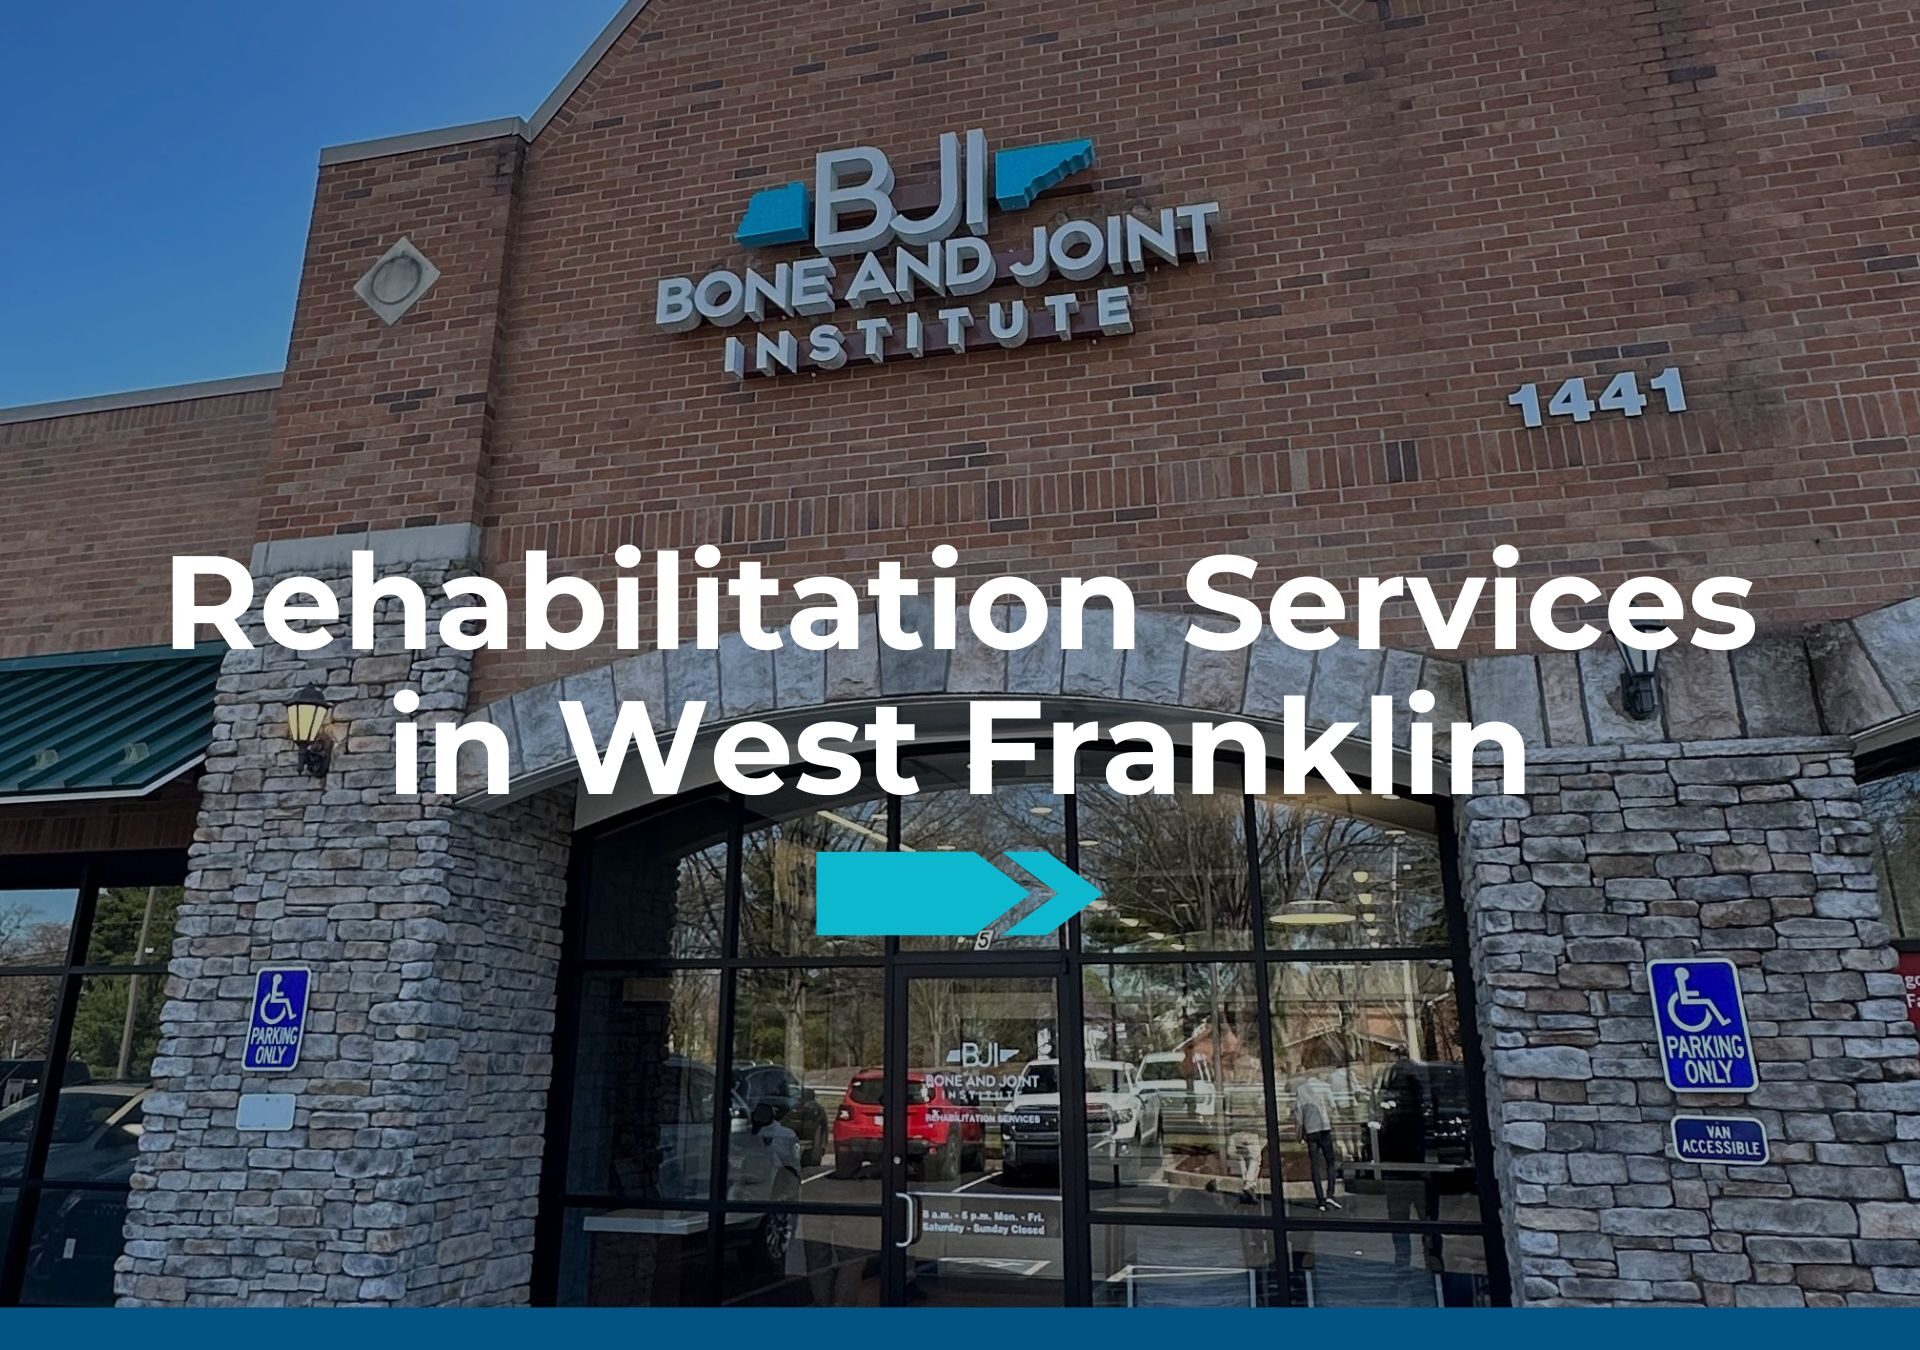 Bone and Joint Institute at West Franklin